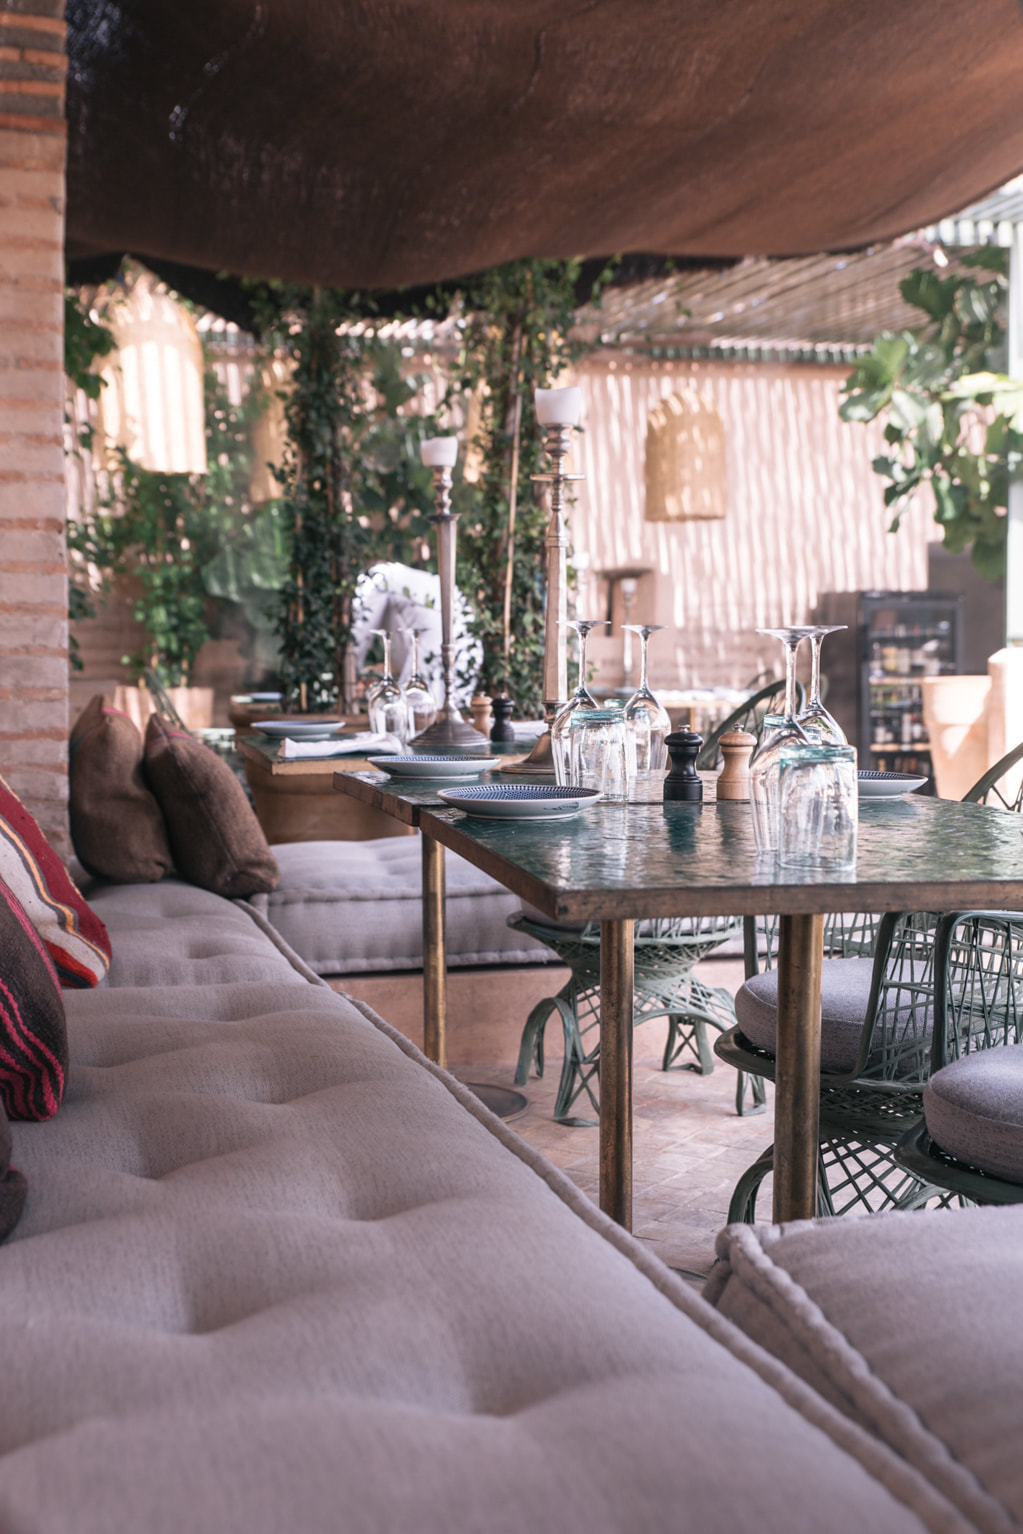 Lazy afternoons at El Fenn in Marrakech, Morocco By The Belle Blog